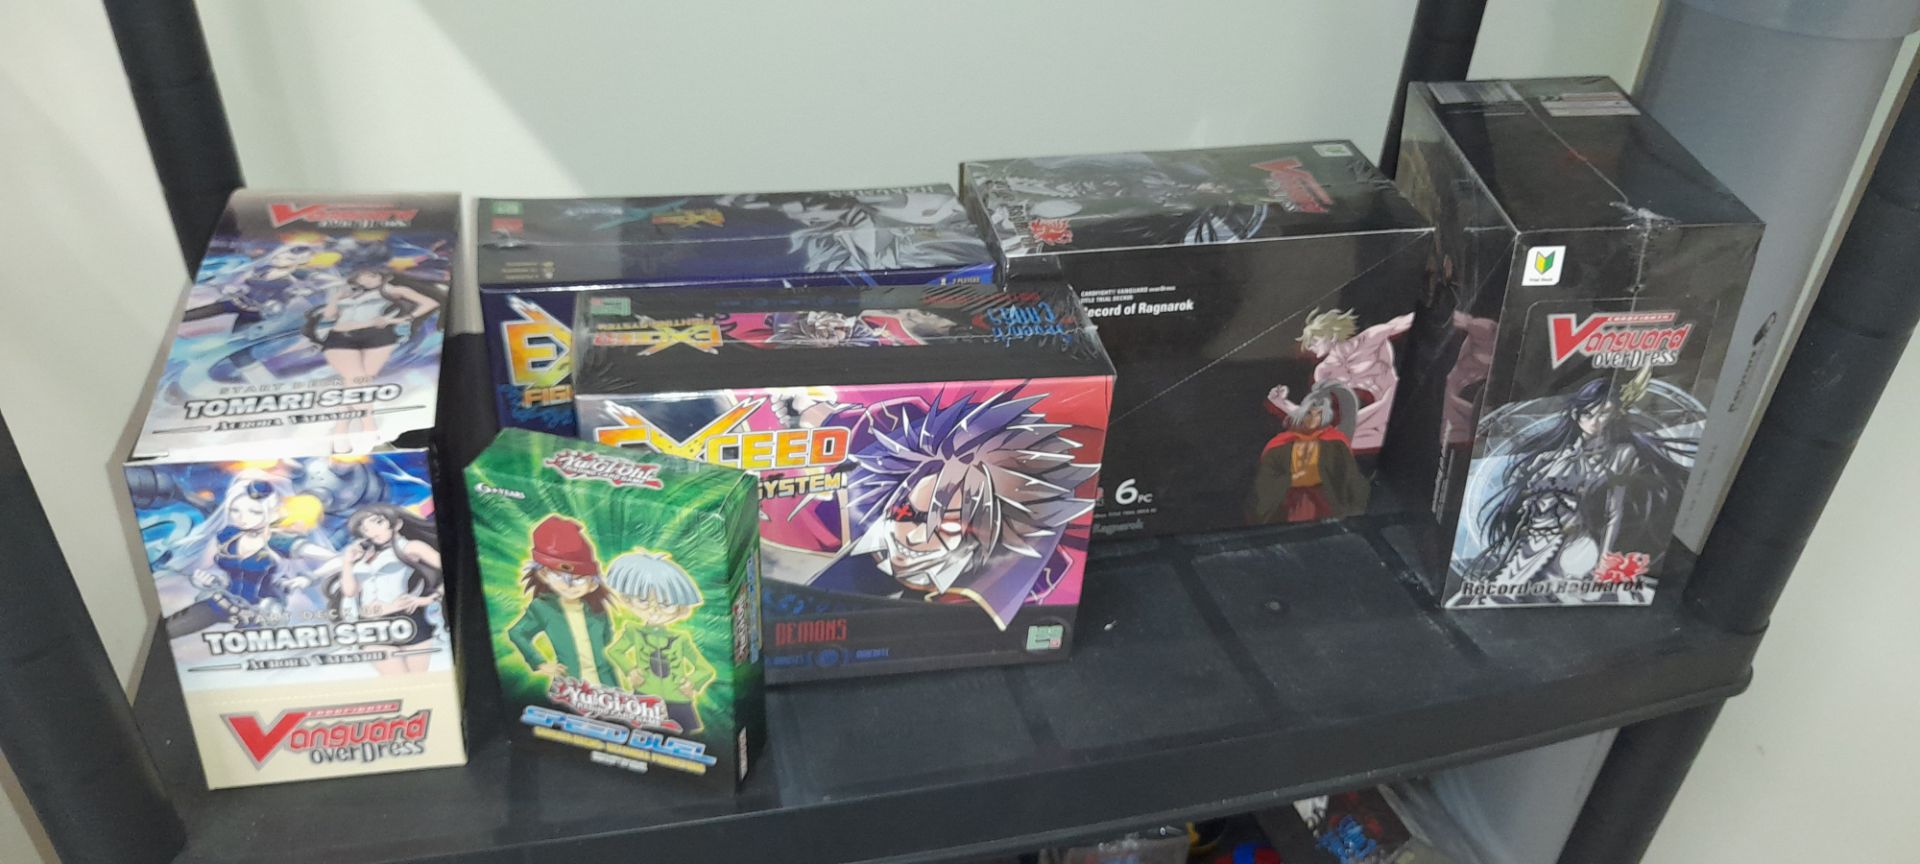 Contents of Five tier plastic shelving unit and metal display stand to include Vanguard CardFight, - Image 4 of 6